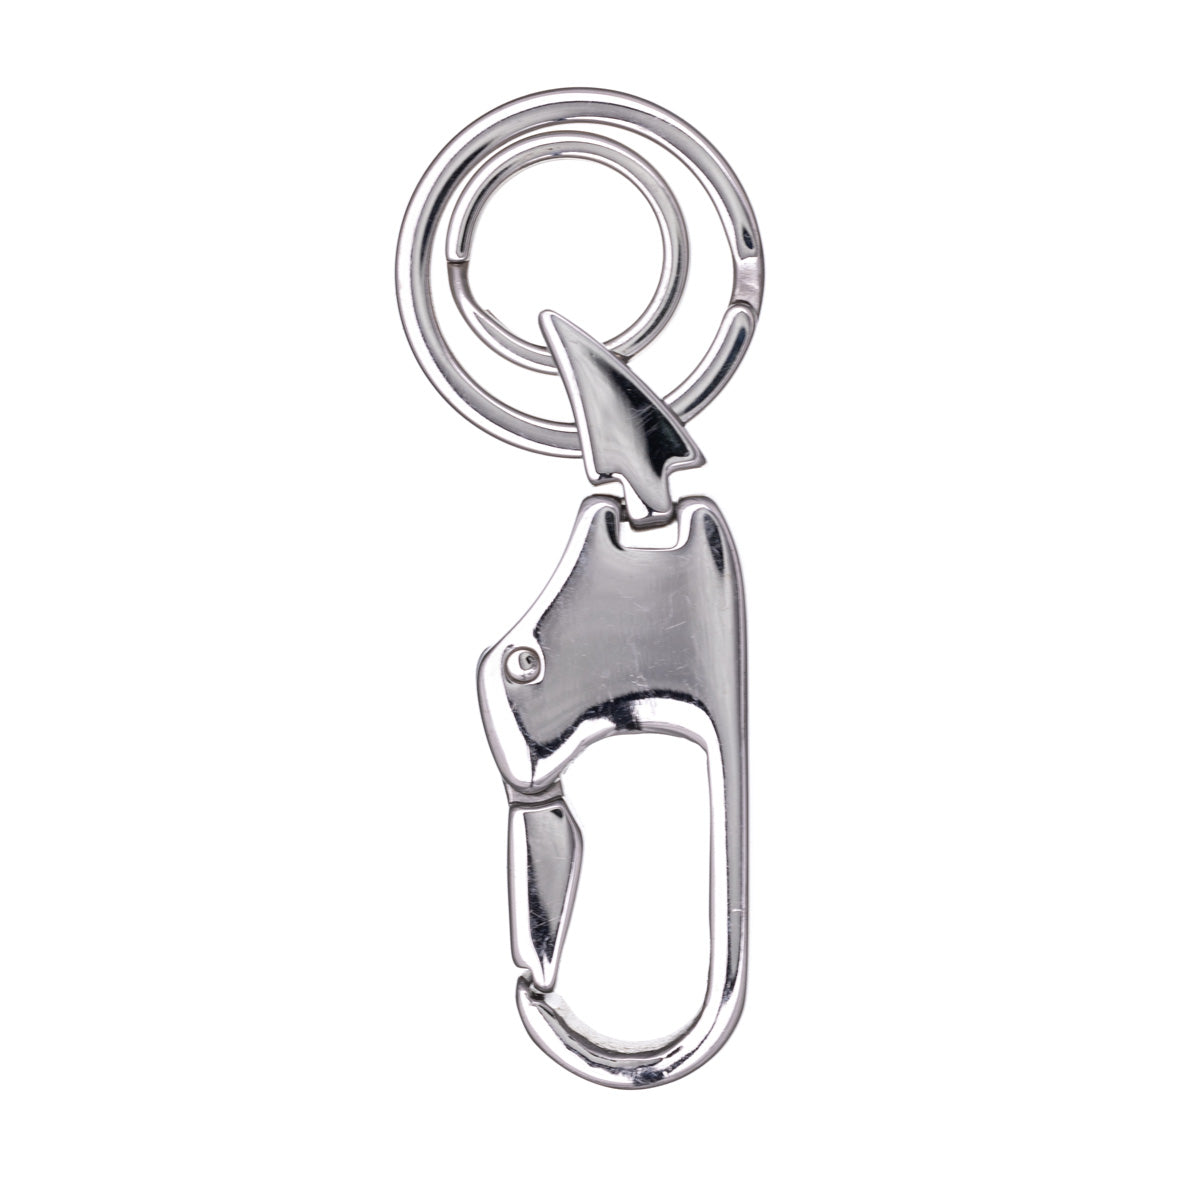 Steel keyring with quick lock carabiner with double links (Steel 316L)